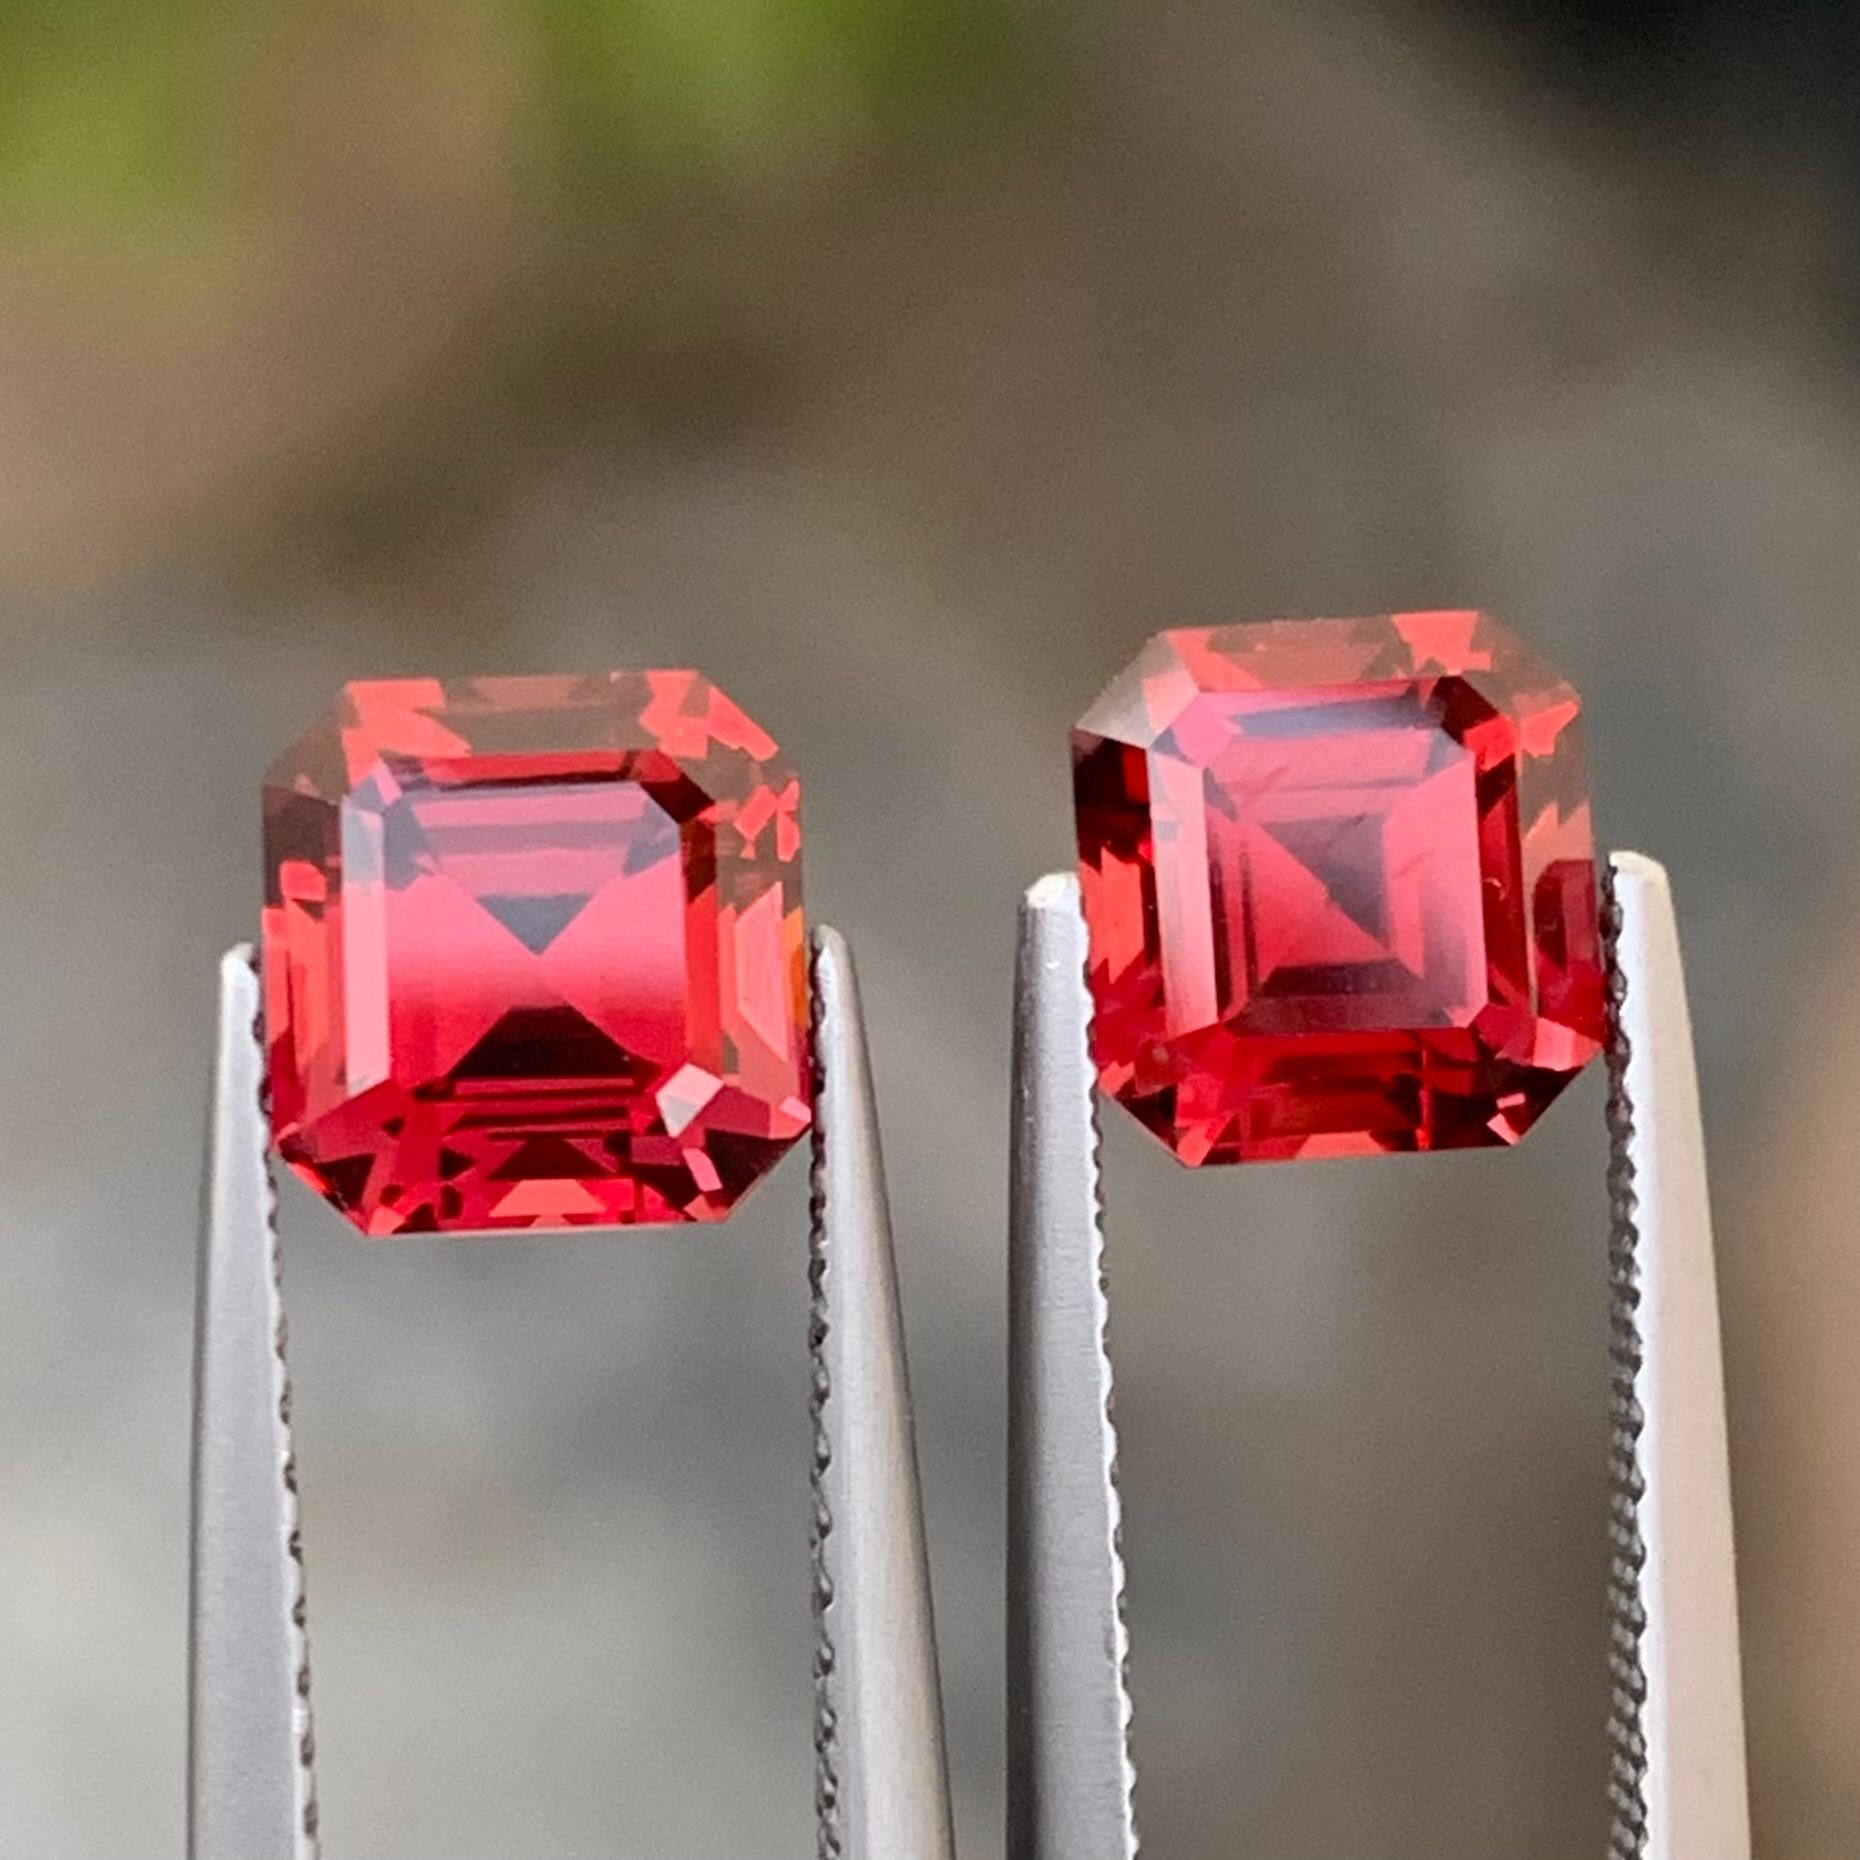 Asscher Cut 4.65 CTS Faceted Rhodolite Garnet Perfect Pairs For Earrings January Birthstone For Sale